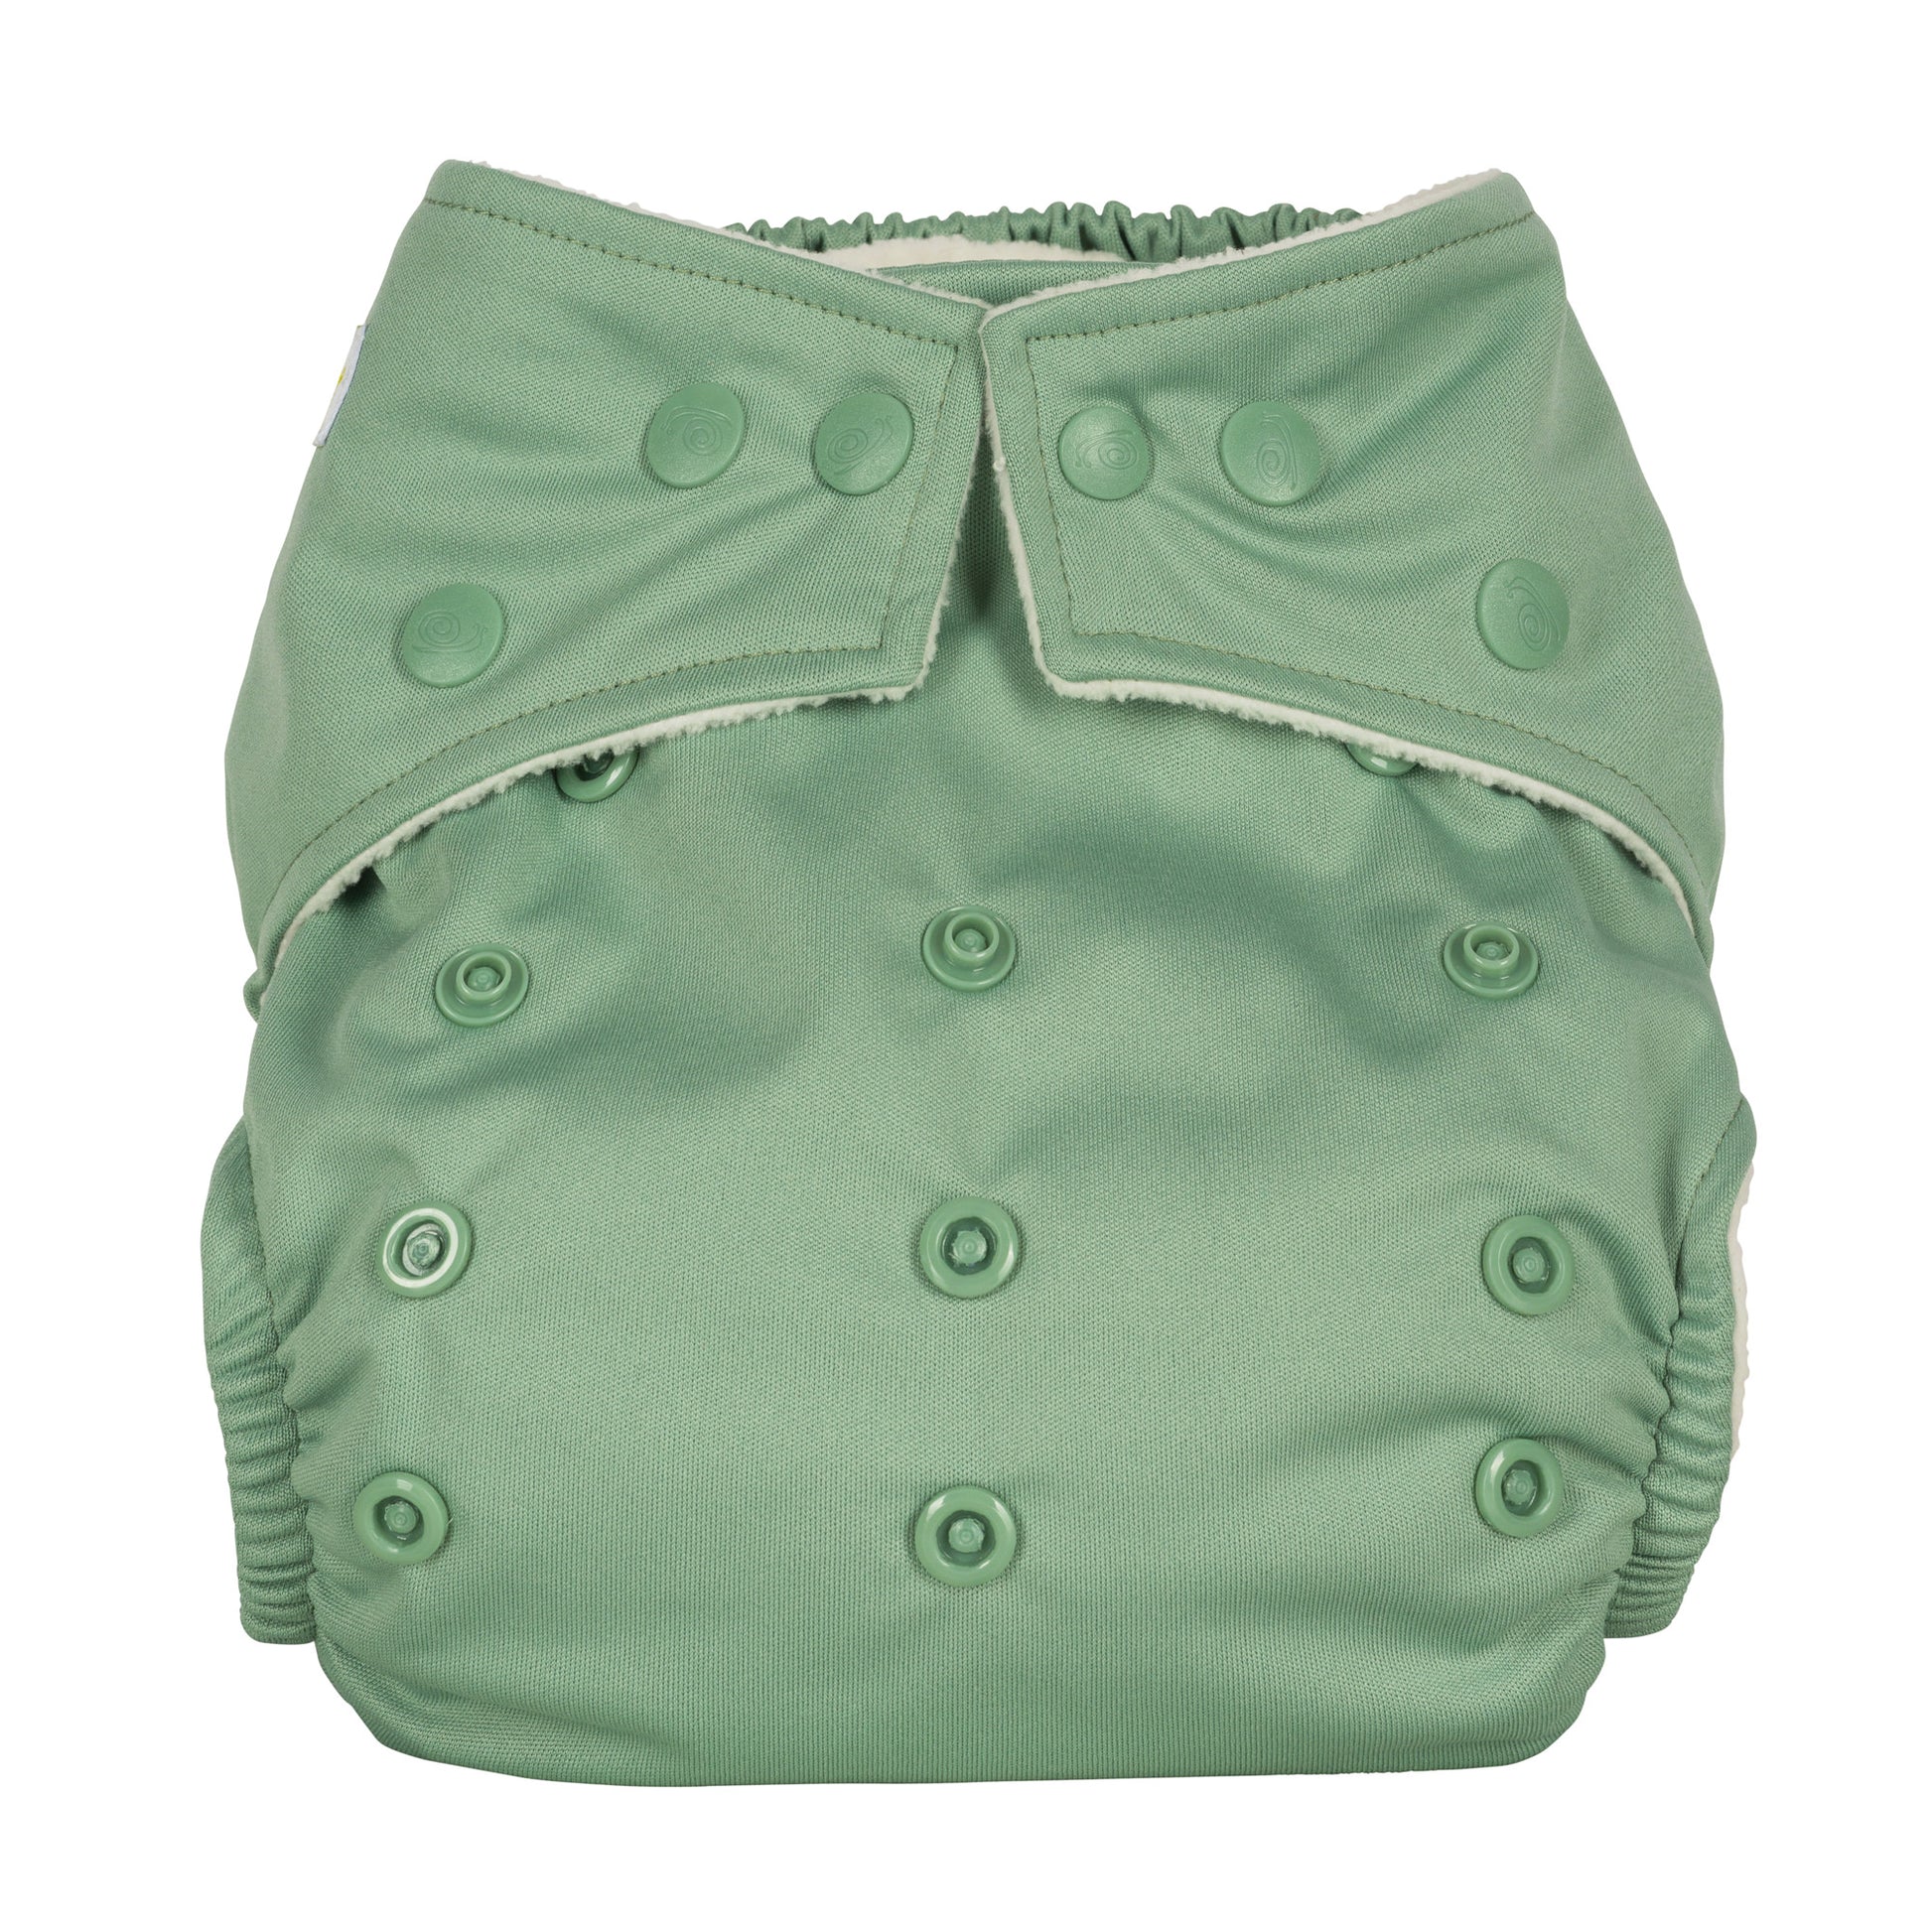 Sage reusable cloth nappy with poppers around the waist and rise snaps across the front.